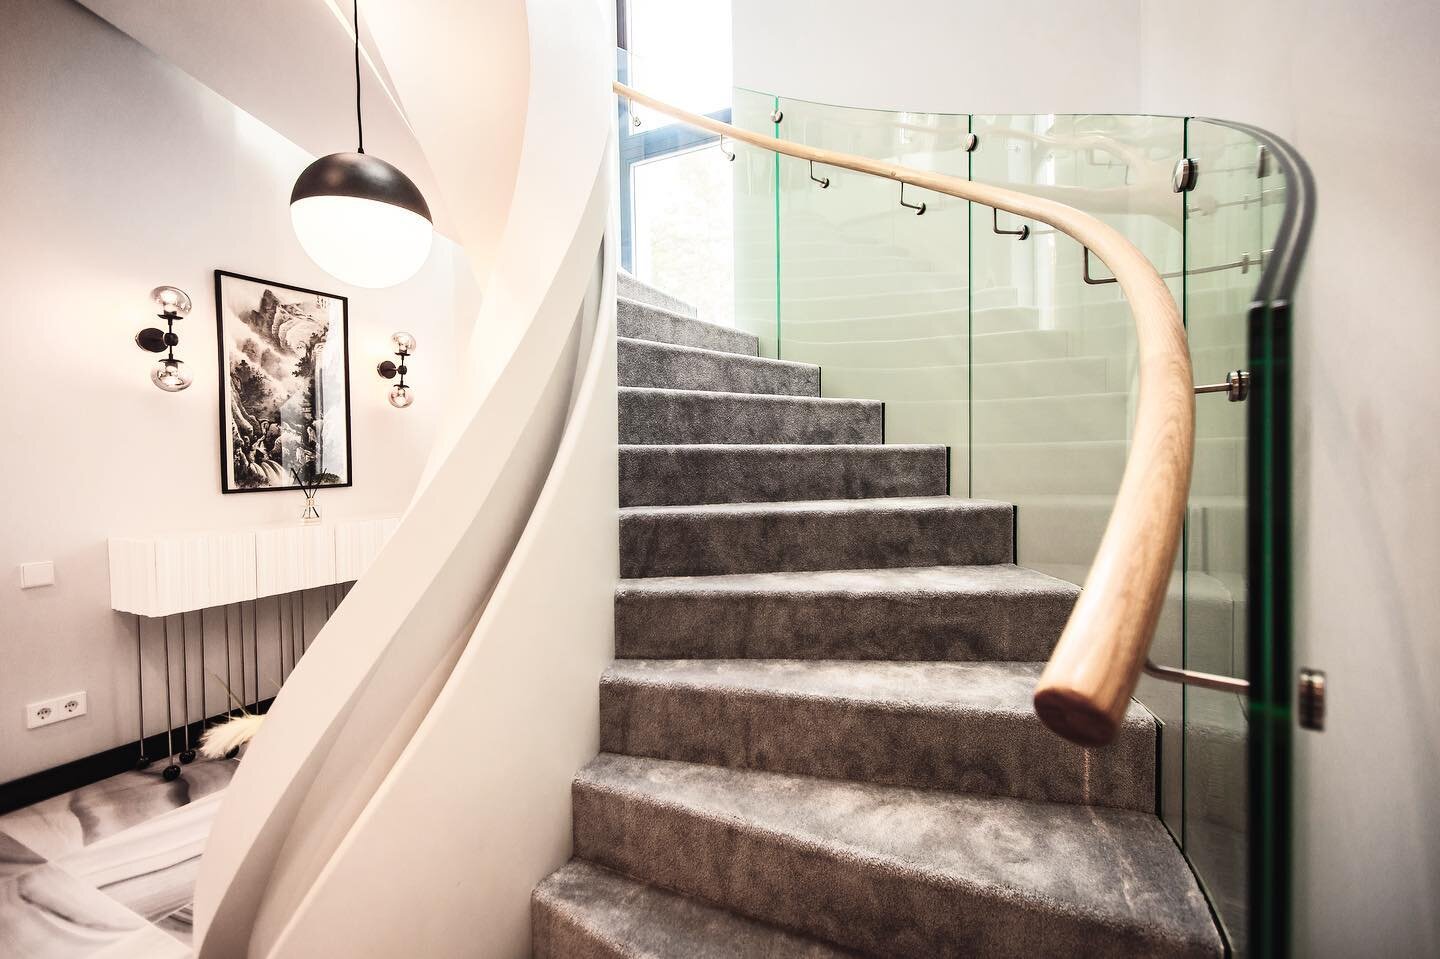 Some more angles with this beautiful masterpiece. Do you think this #curvedstaircase looks better with the lighting on in the room or in the natural light? Would you like a staircase like this in your home? 😍🏠
.
.
.
#interiors4all #interiordecorati